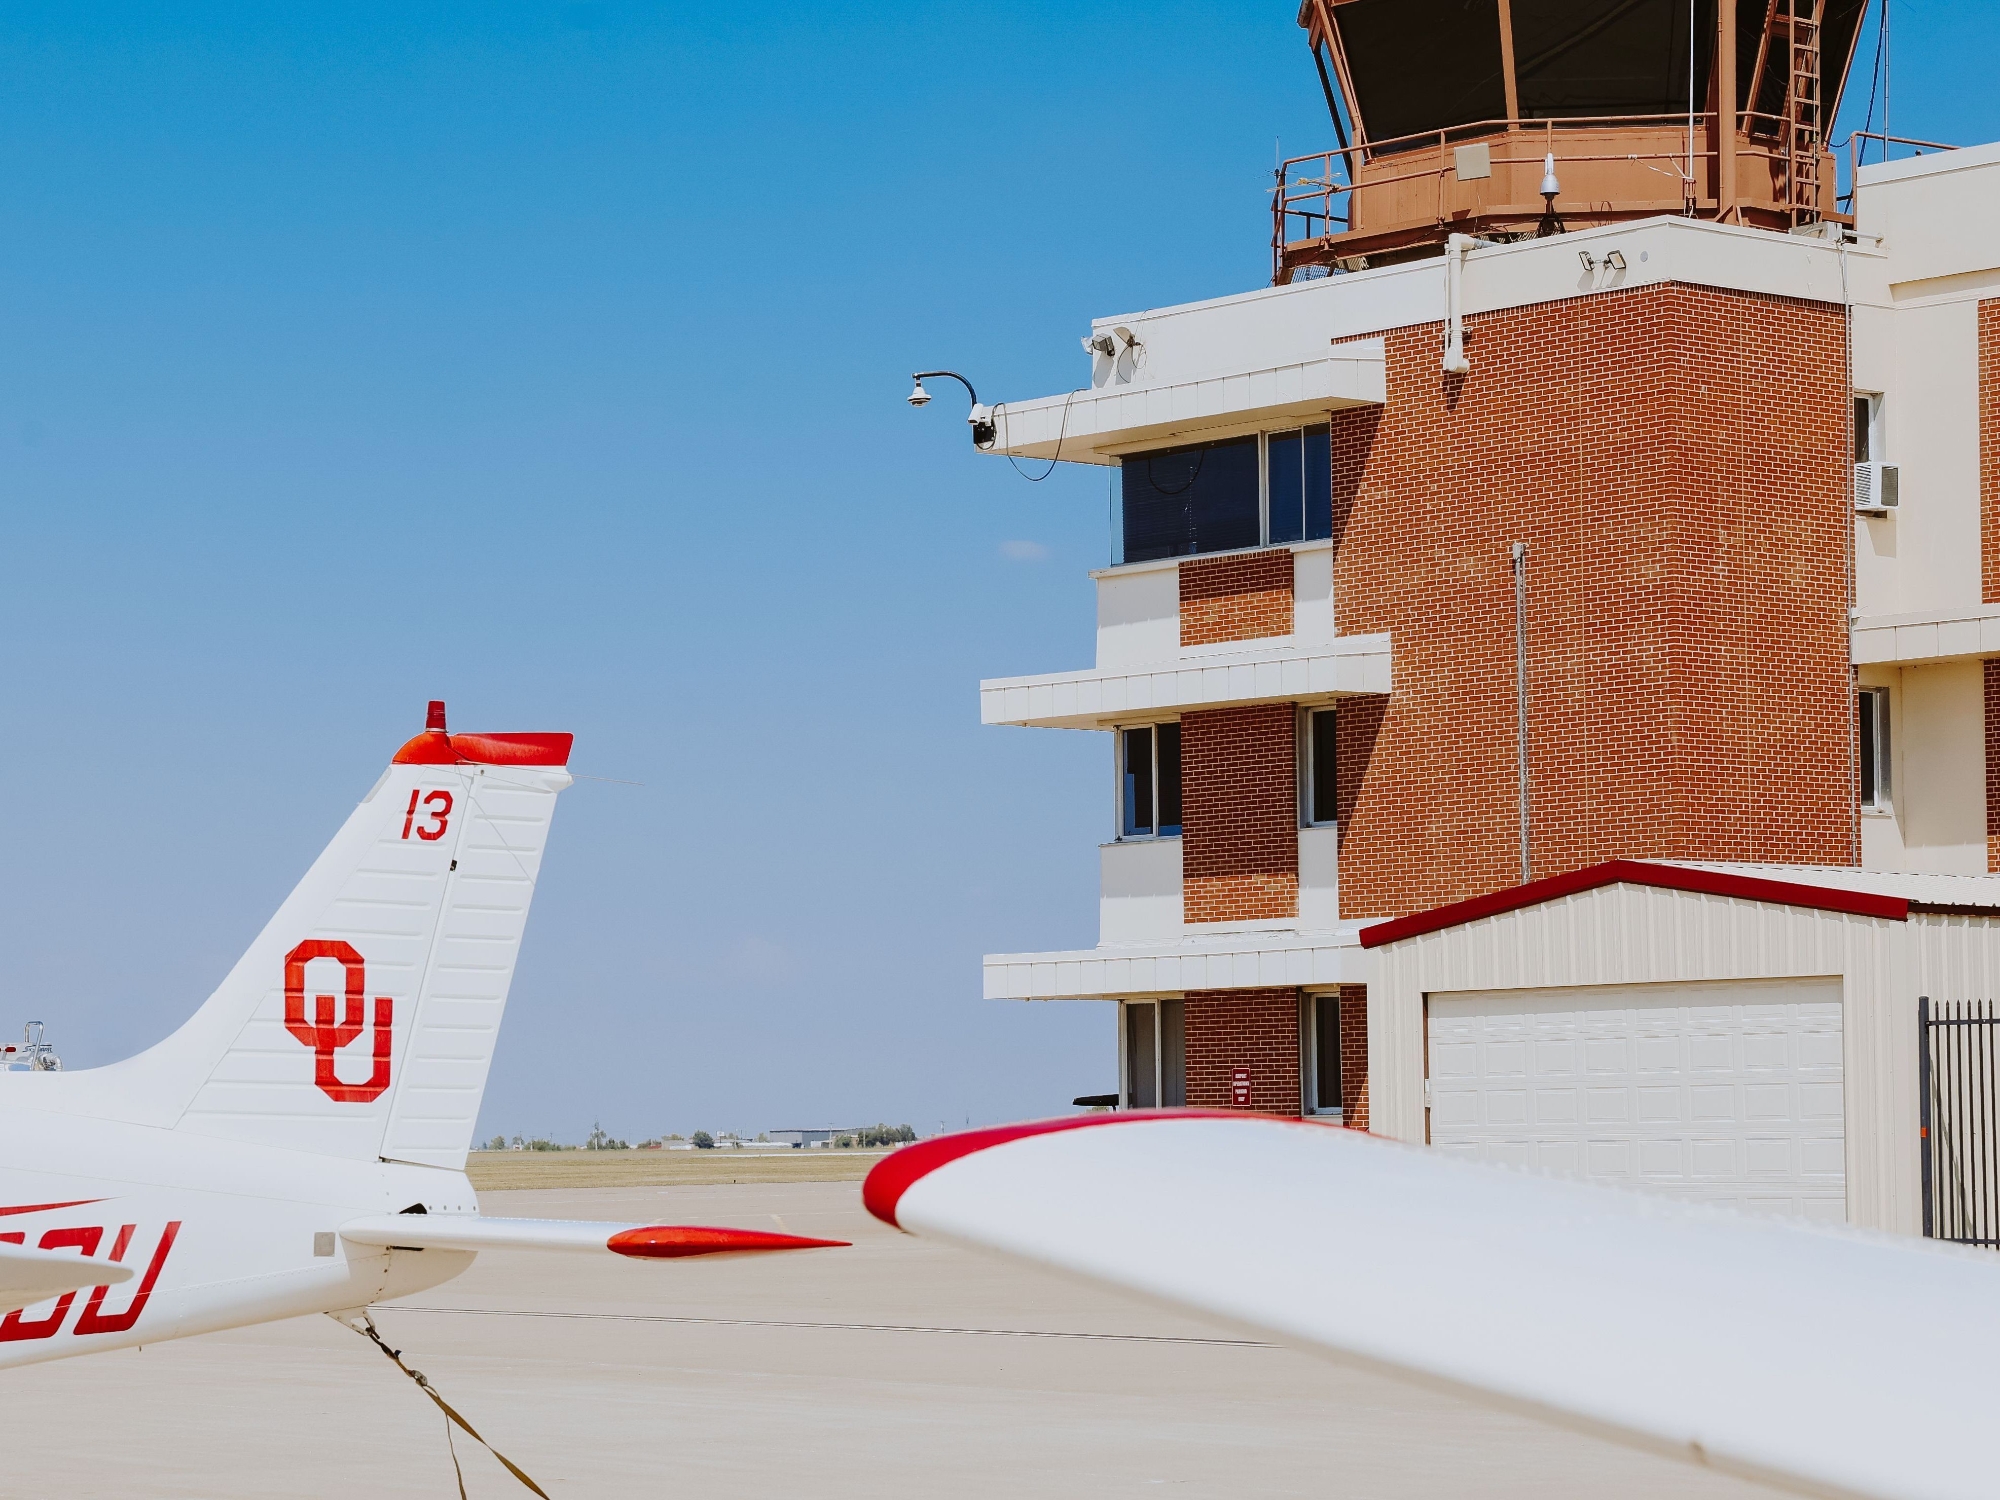 two aviation students inspecting the tailfin of the plane with the OU logo on the vertical shaft of the tailfin. 